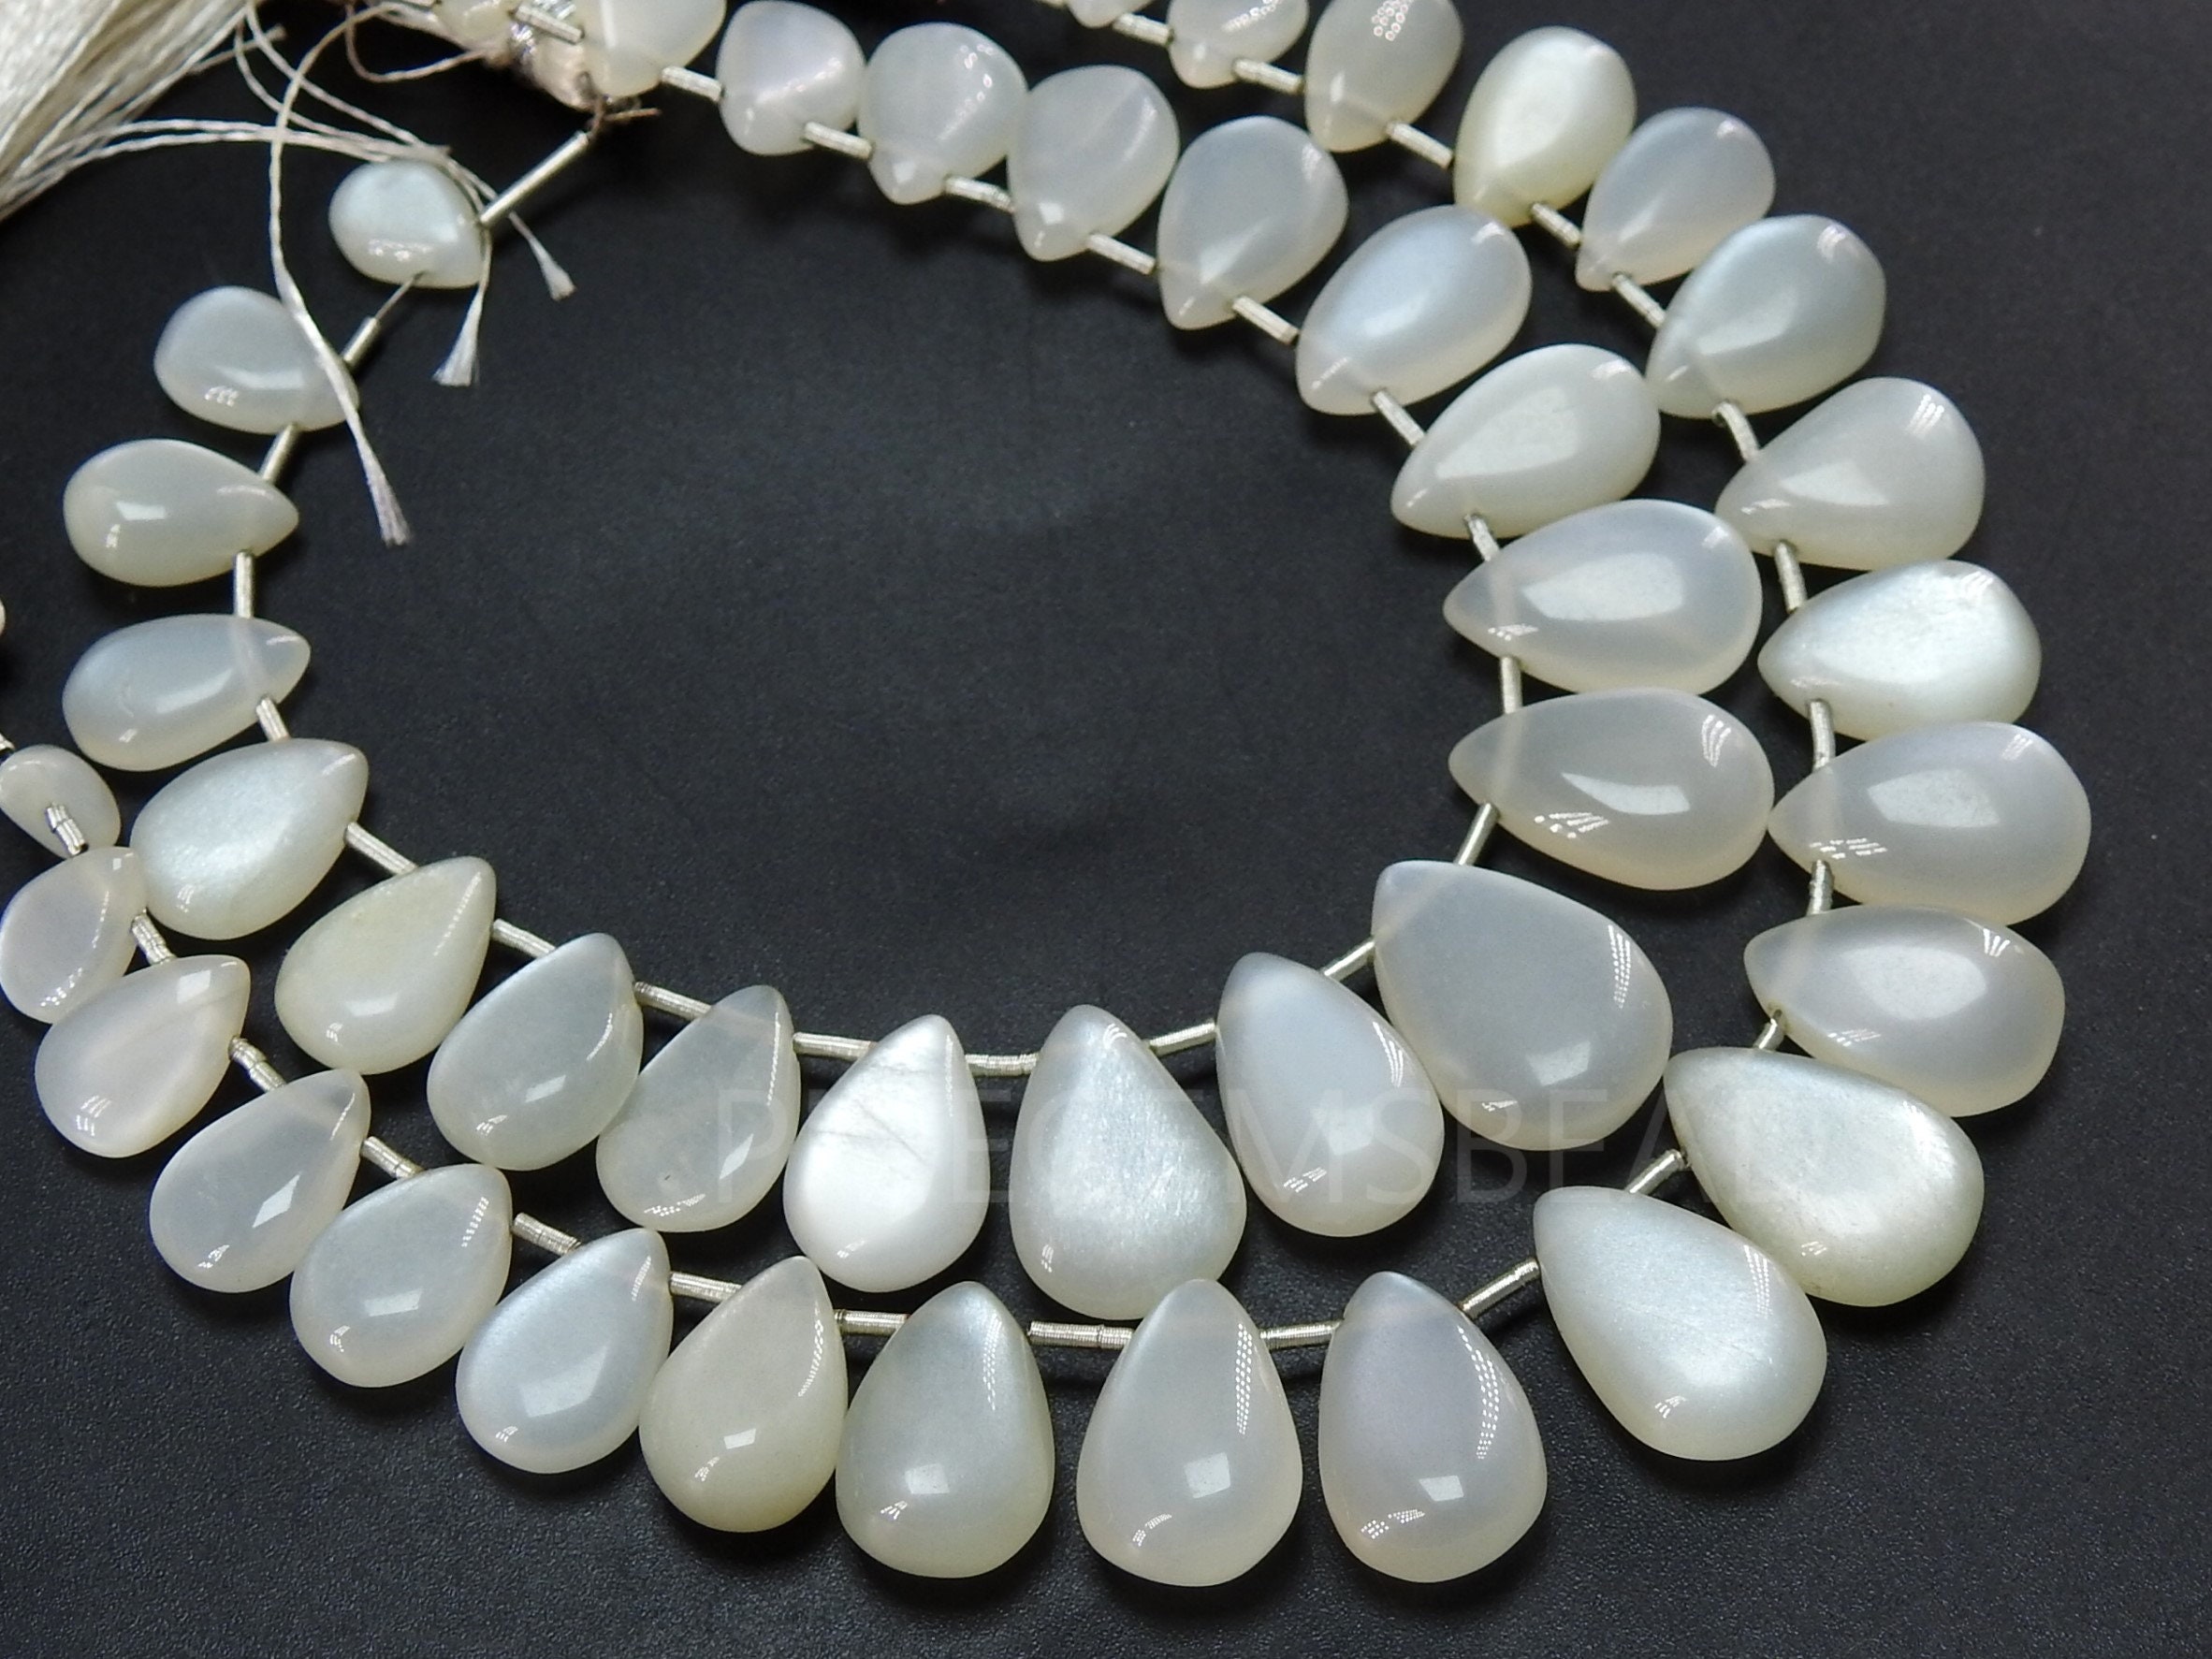 White Moonstone Smooth Teardrop,Drop,Loose Stone,Handmade Bead,For Making Jewelry,Wholesaler,Supplies,7Inchs 15X10To9X6MM Approx,PME-BR2 | Save 33% - Rajasthan Living 14